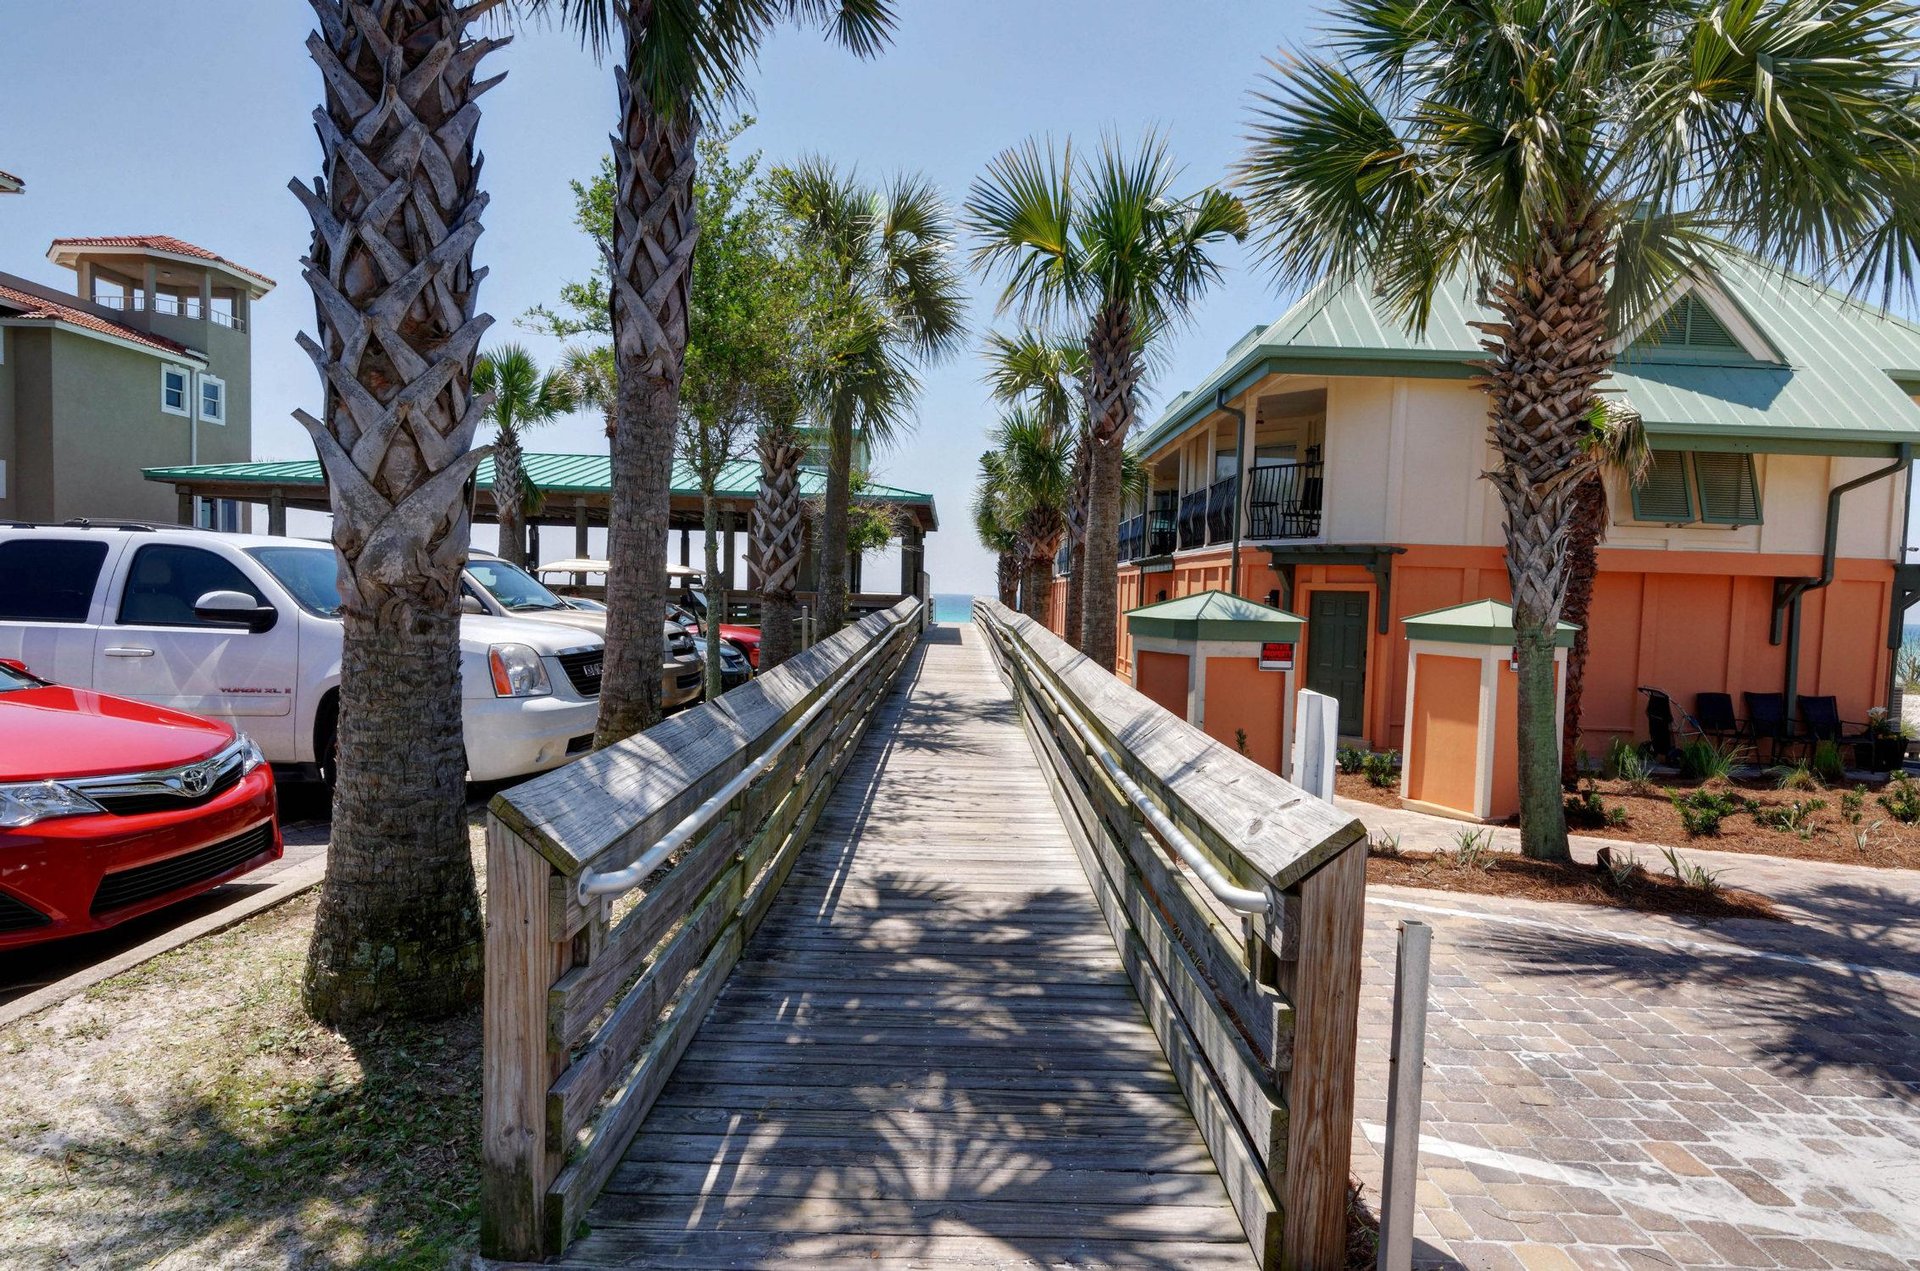 Handicap Accessible Ramps to the Beach